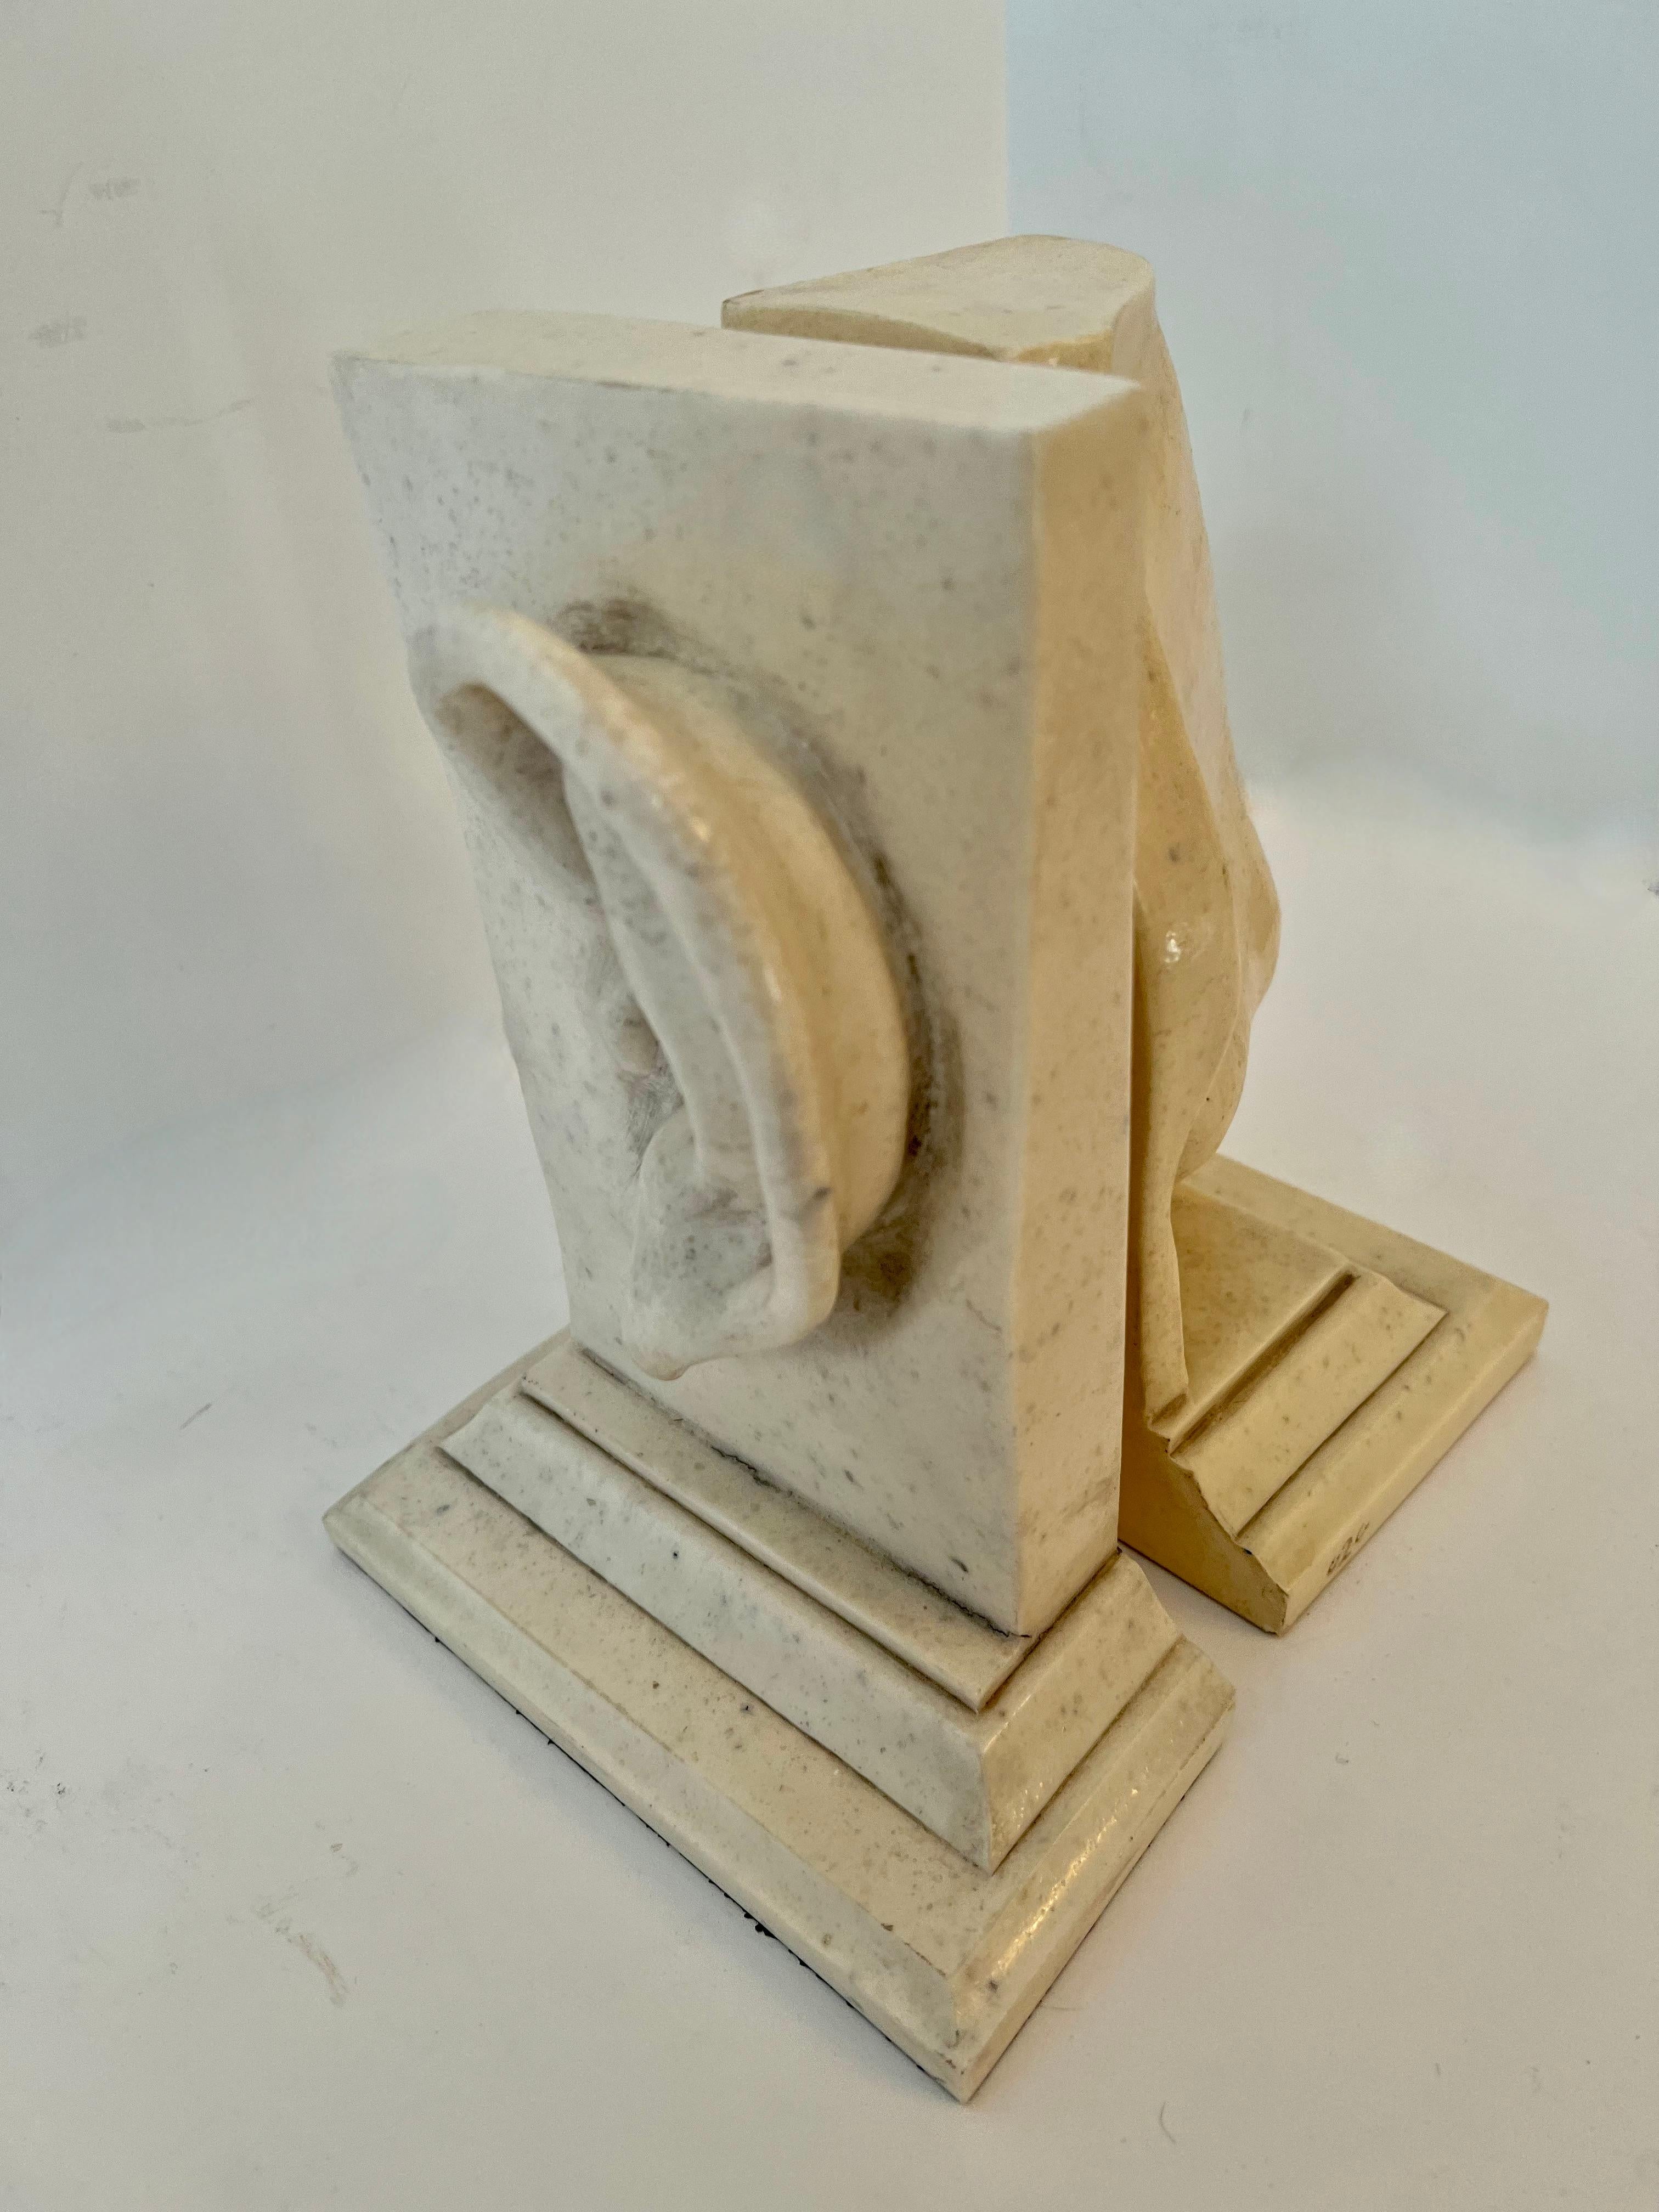 Pair of C2C Designs, a Resin Based Sculptural Ear and Nose Bookend Set In Good Condition For Sale In Los Angeles, CA